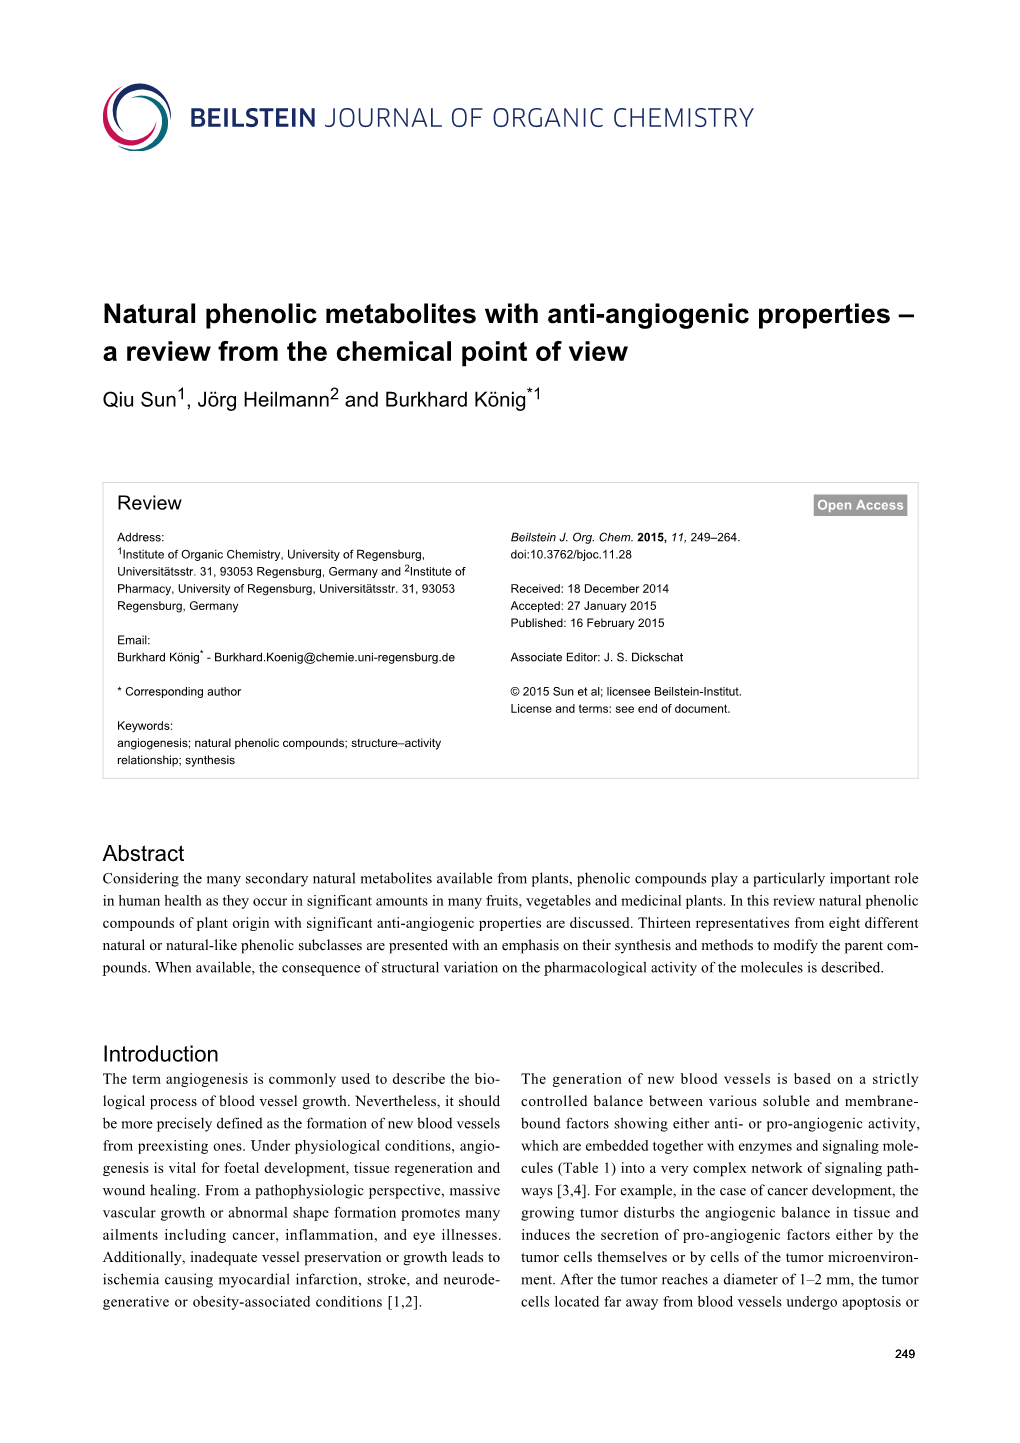 Natural Phenolic Metabolites with Anti-Angiogenic Properties – a Review from the Chemical Point of View